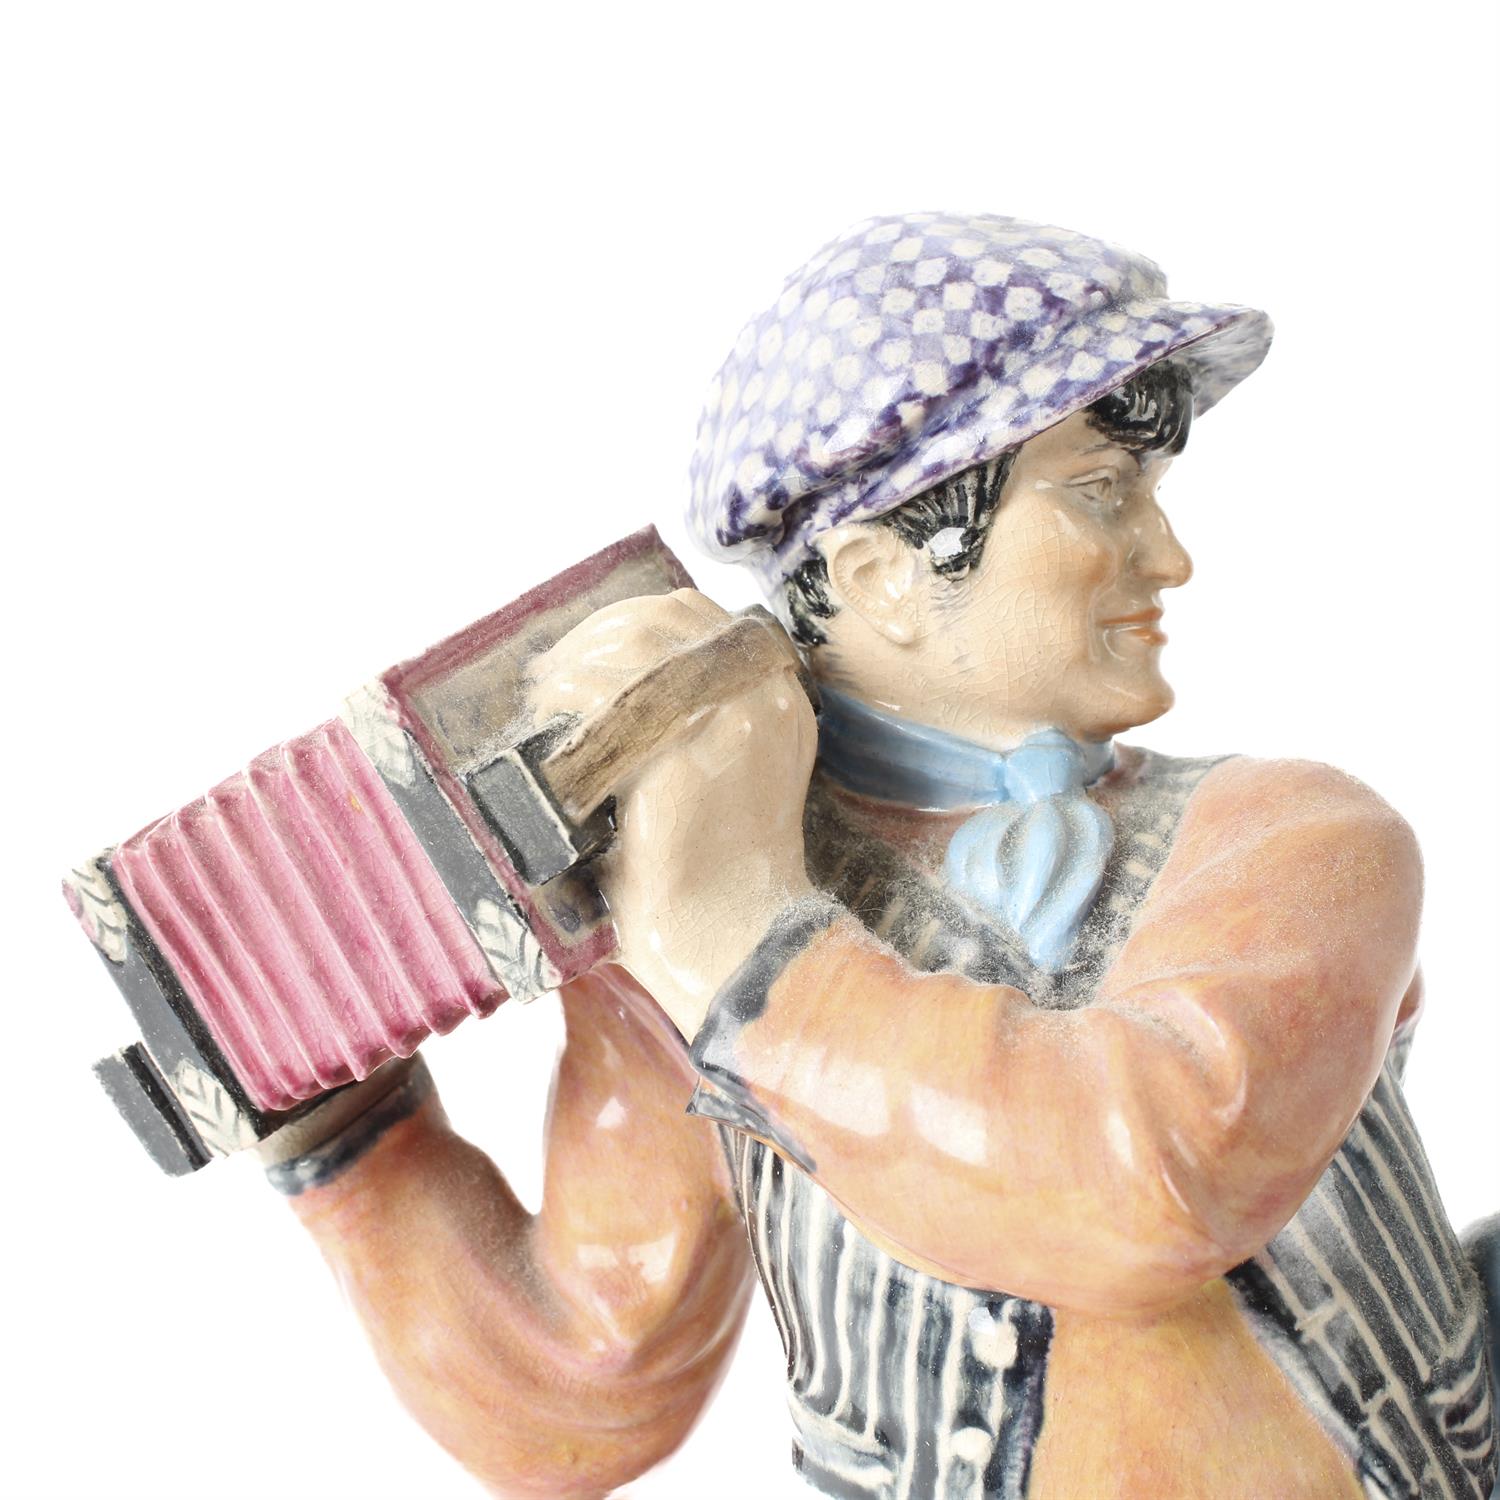 Charles Vyse 'The Dancing Gypsies' figural group - Image 4 of 9